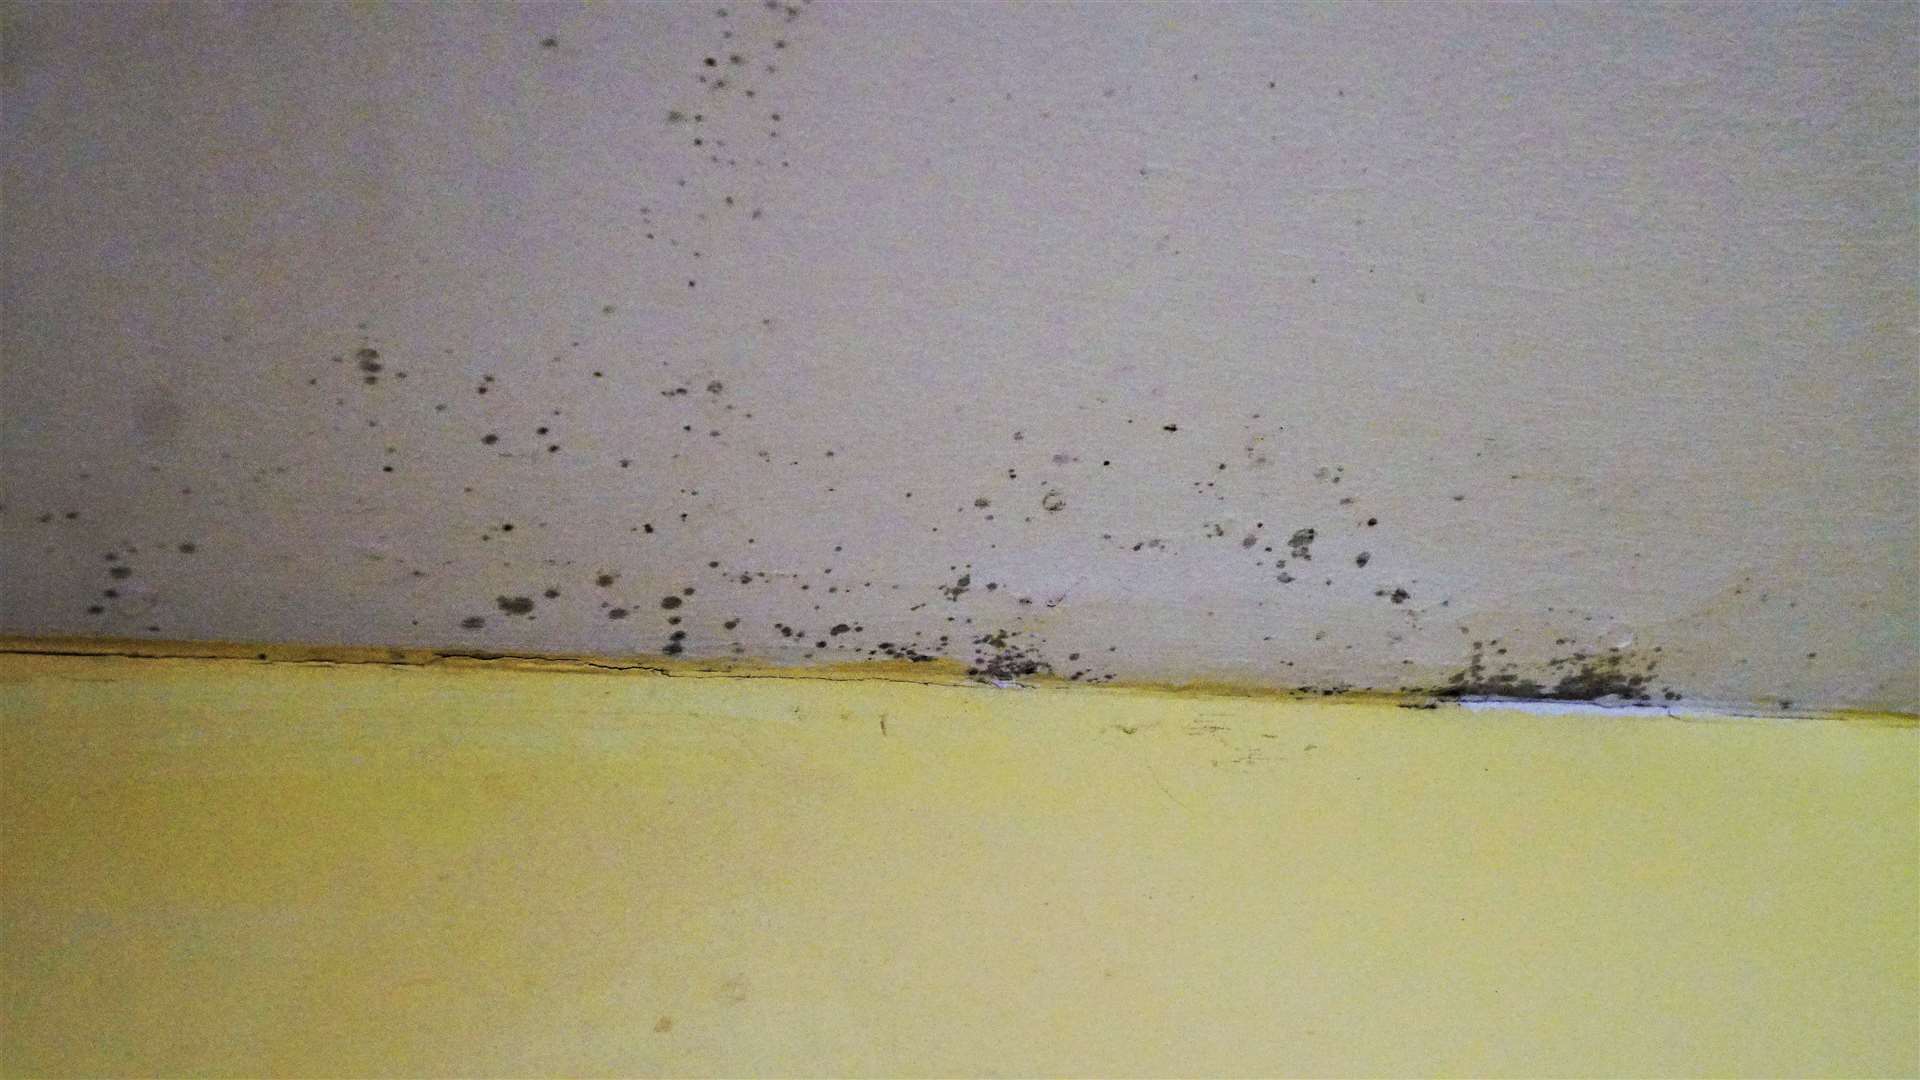 Damp mould appeared in Mr Harris' kitchen when he had to cut down the heating in his kitchen. Picture: DGS